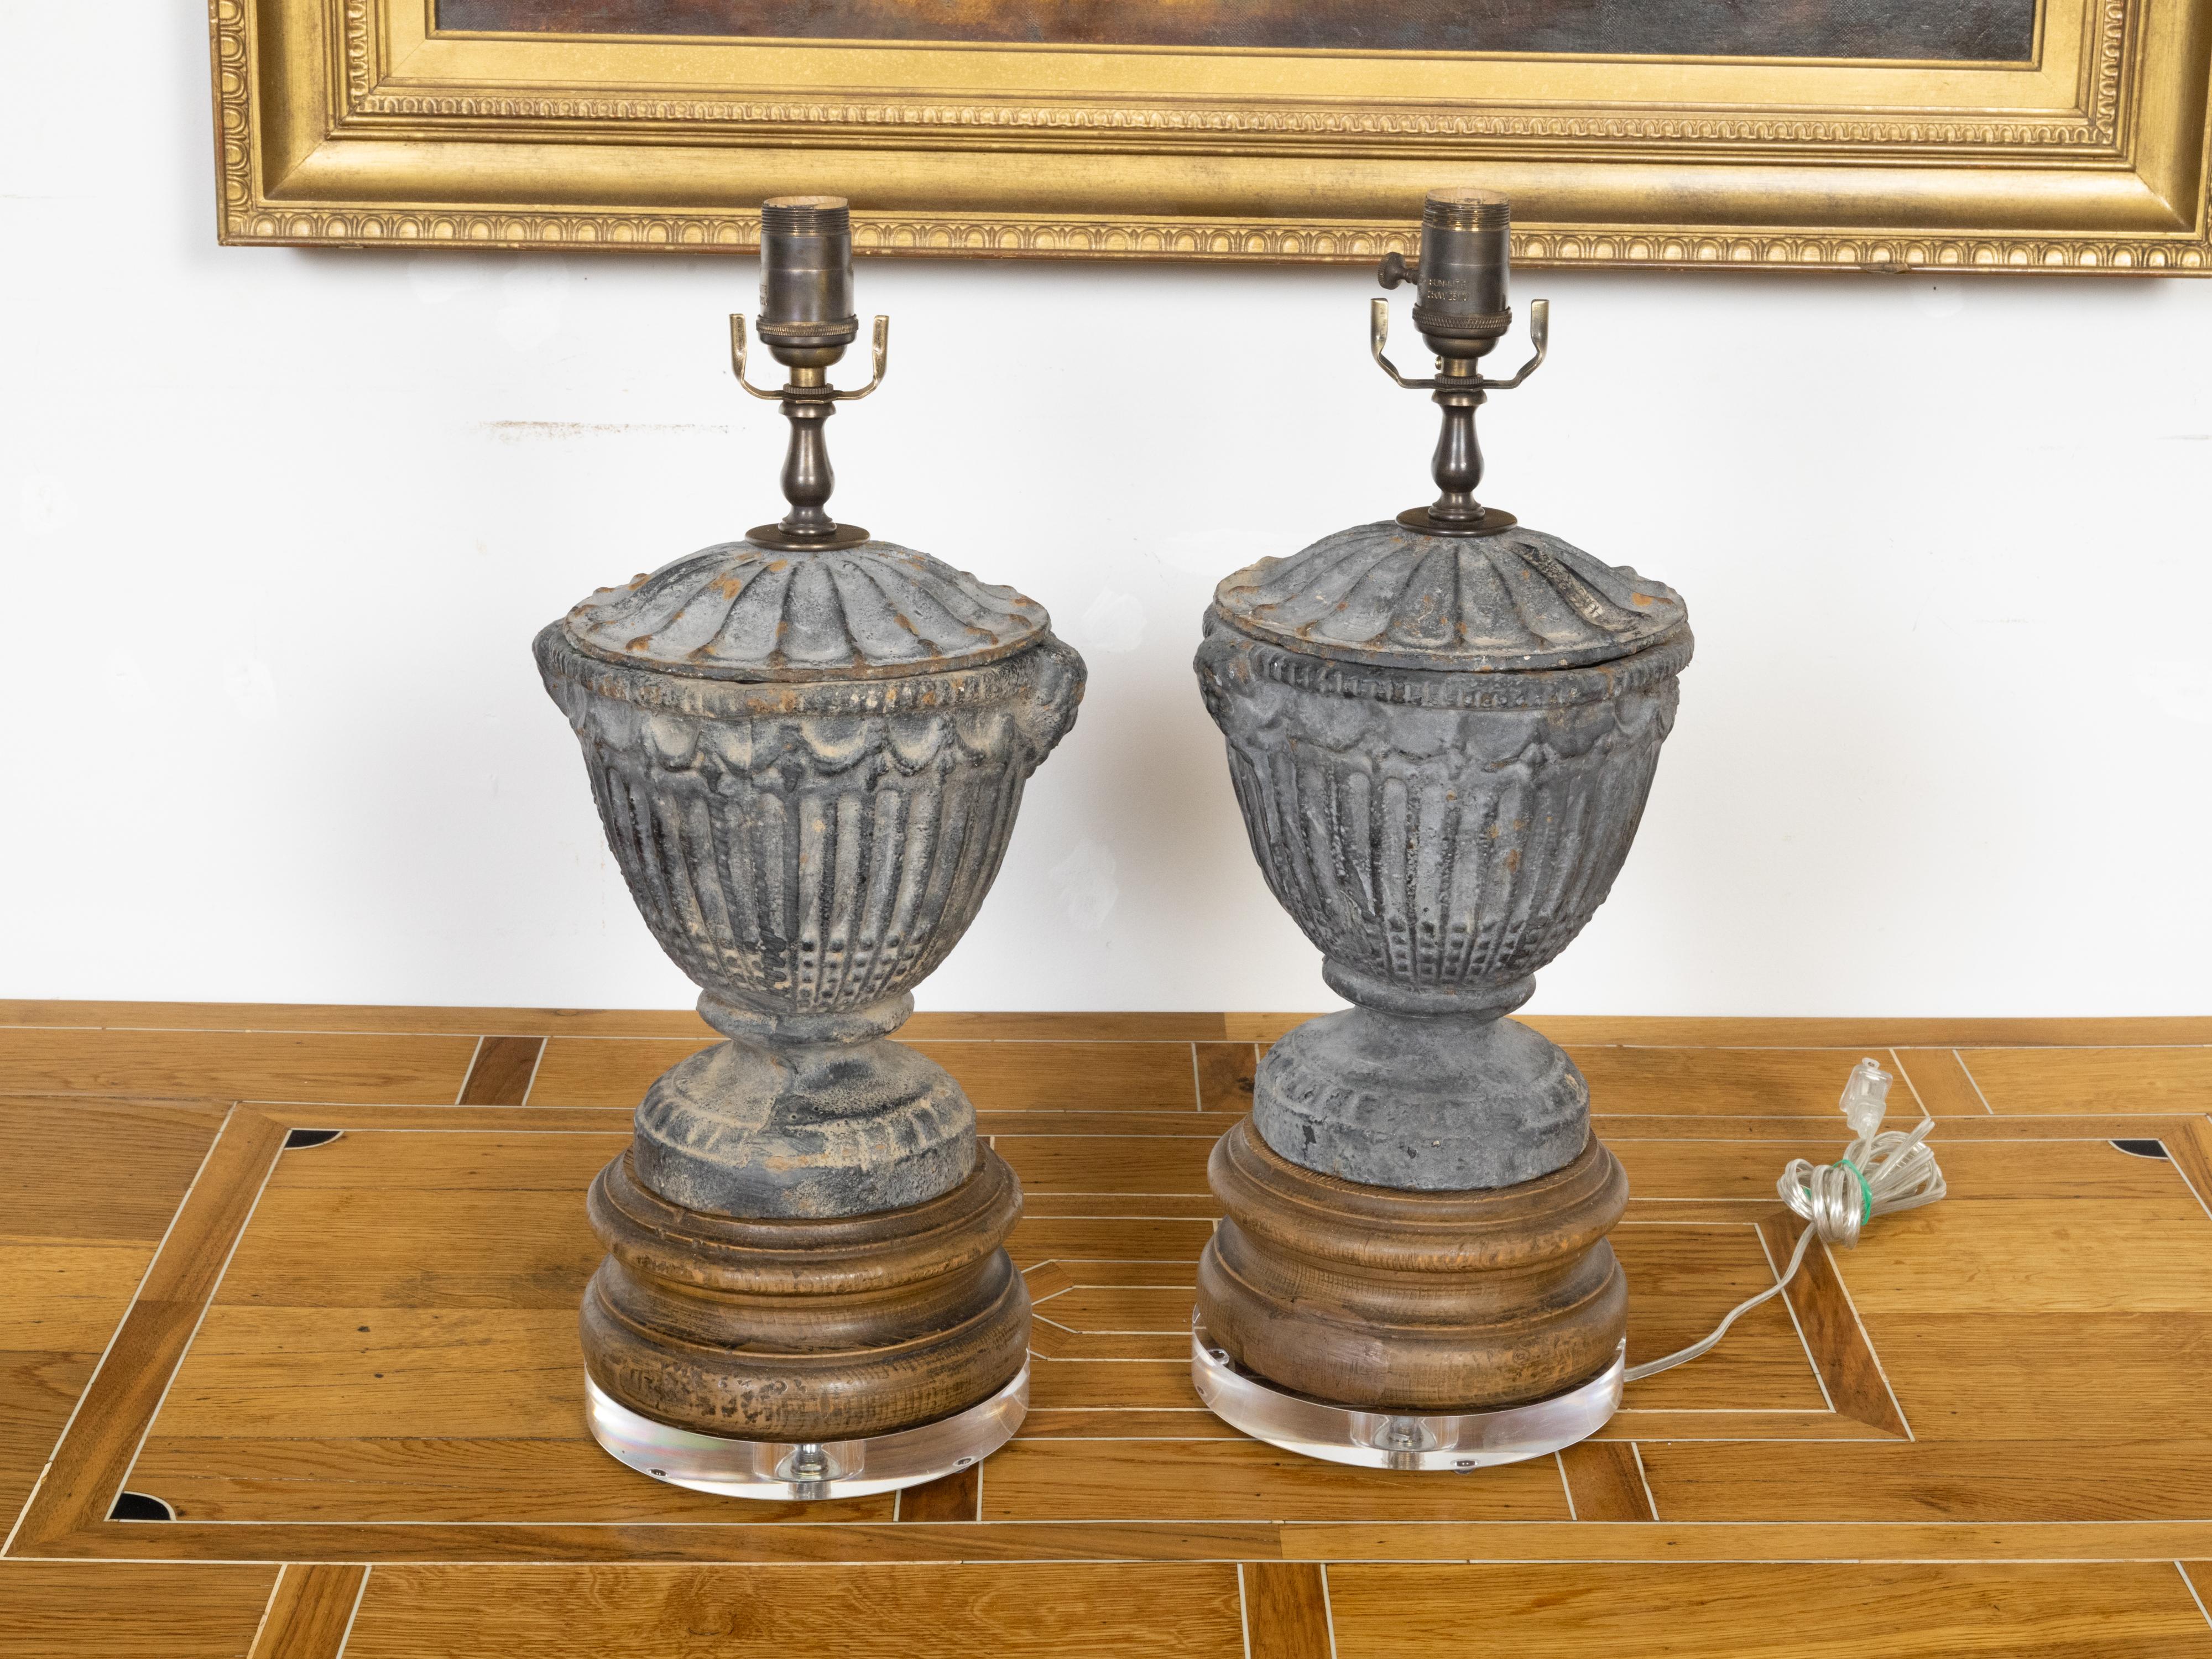 A pair of French iron table lamps from the mid 20th century, on wooden and lucite bases. Created in France during the Midcentury period, each of this pair of table lamps features an iron lidded vase adorned with fluted accents and petite decorative